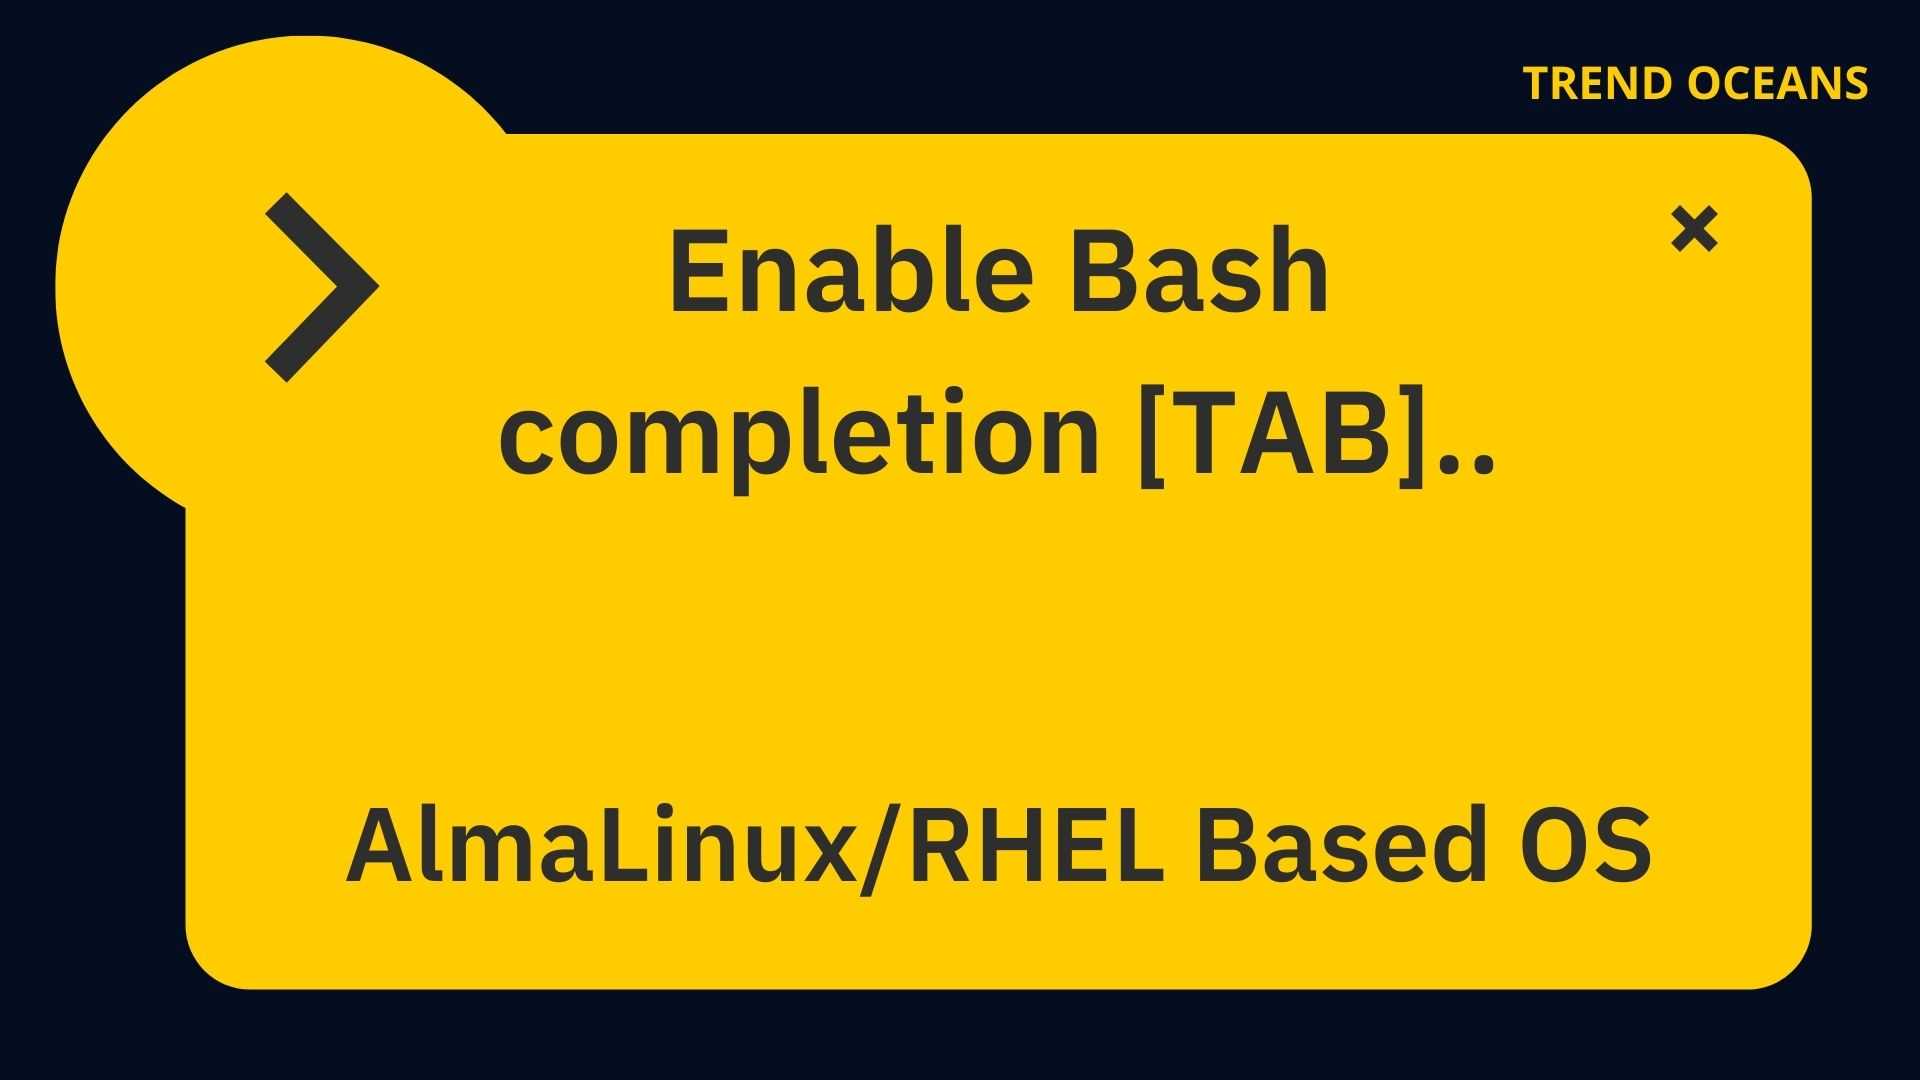 Enable bash completion [TAB]